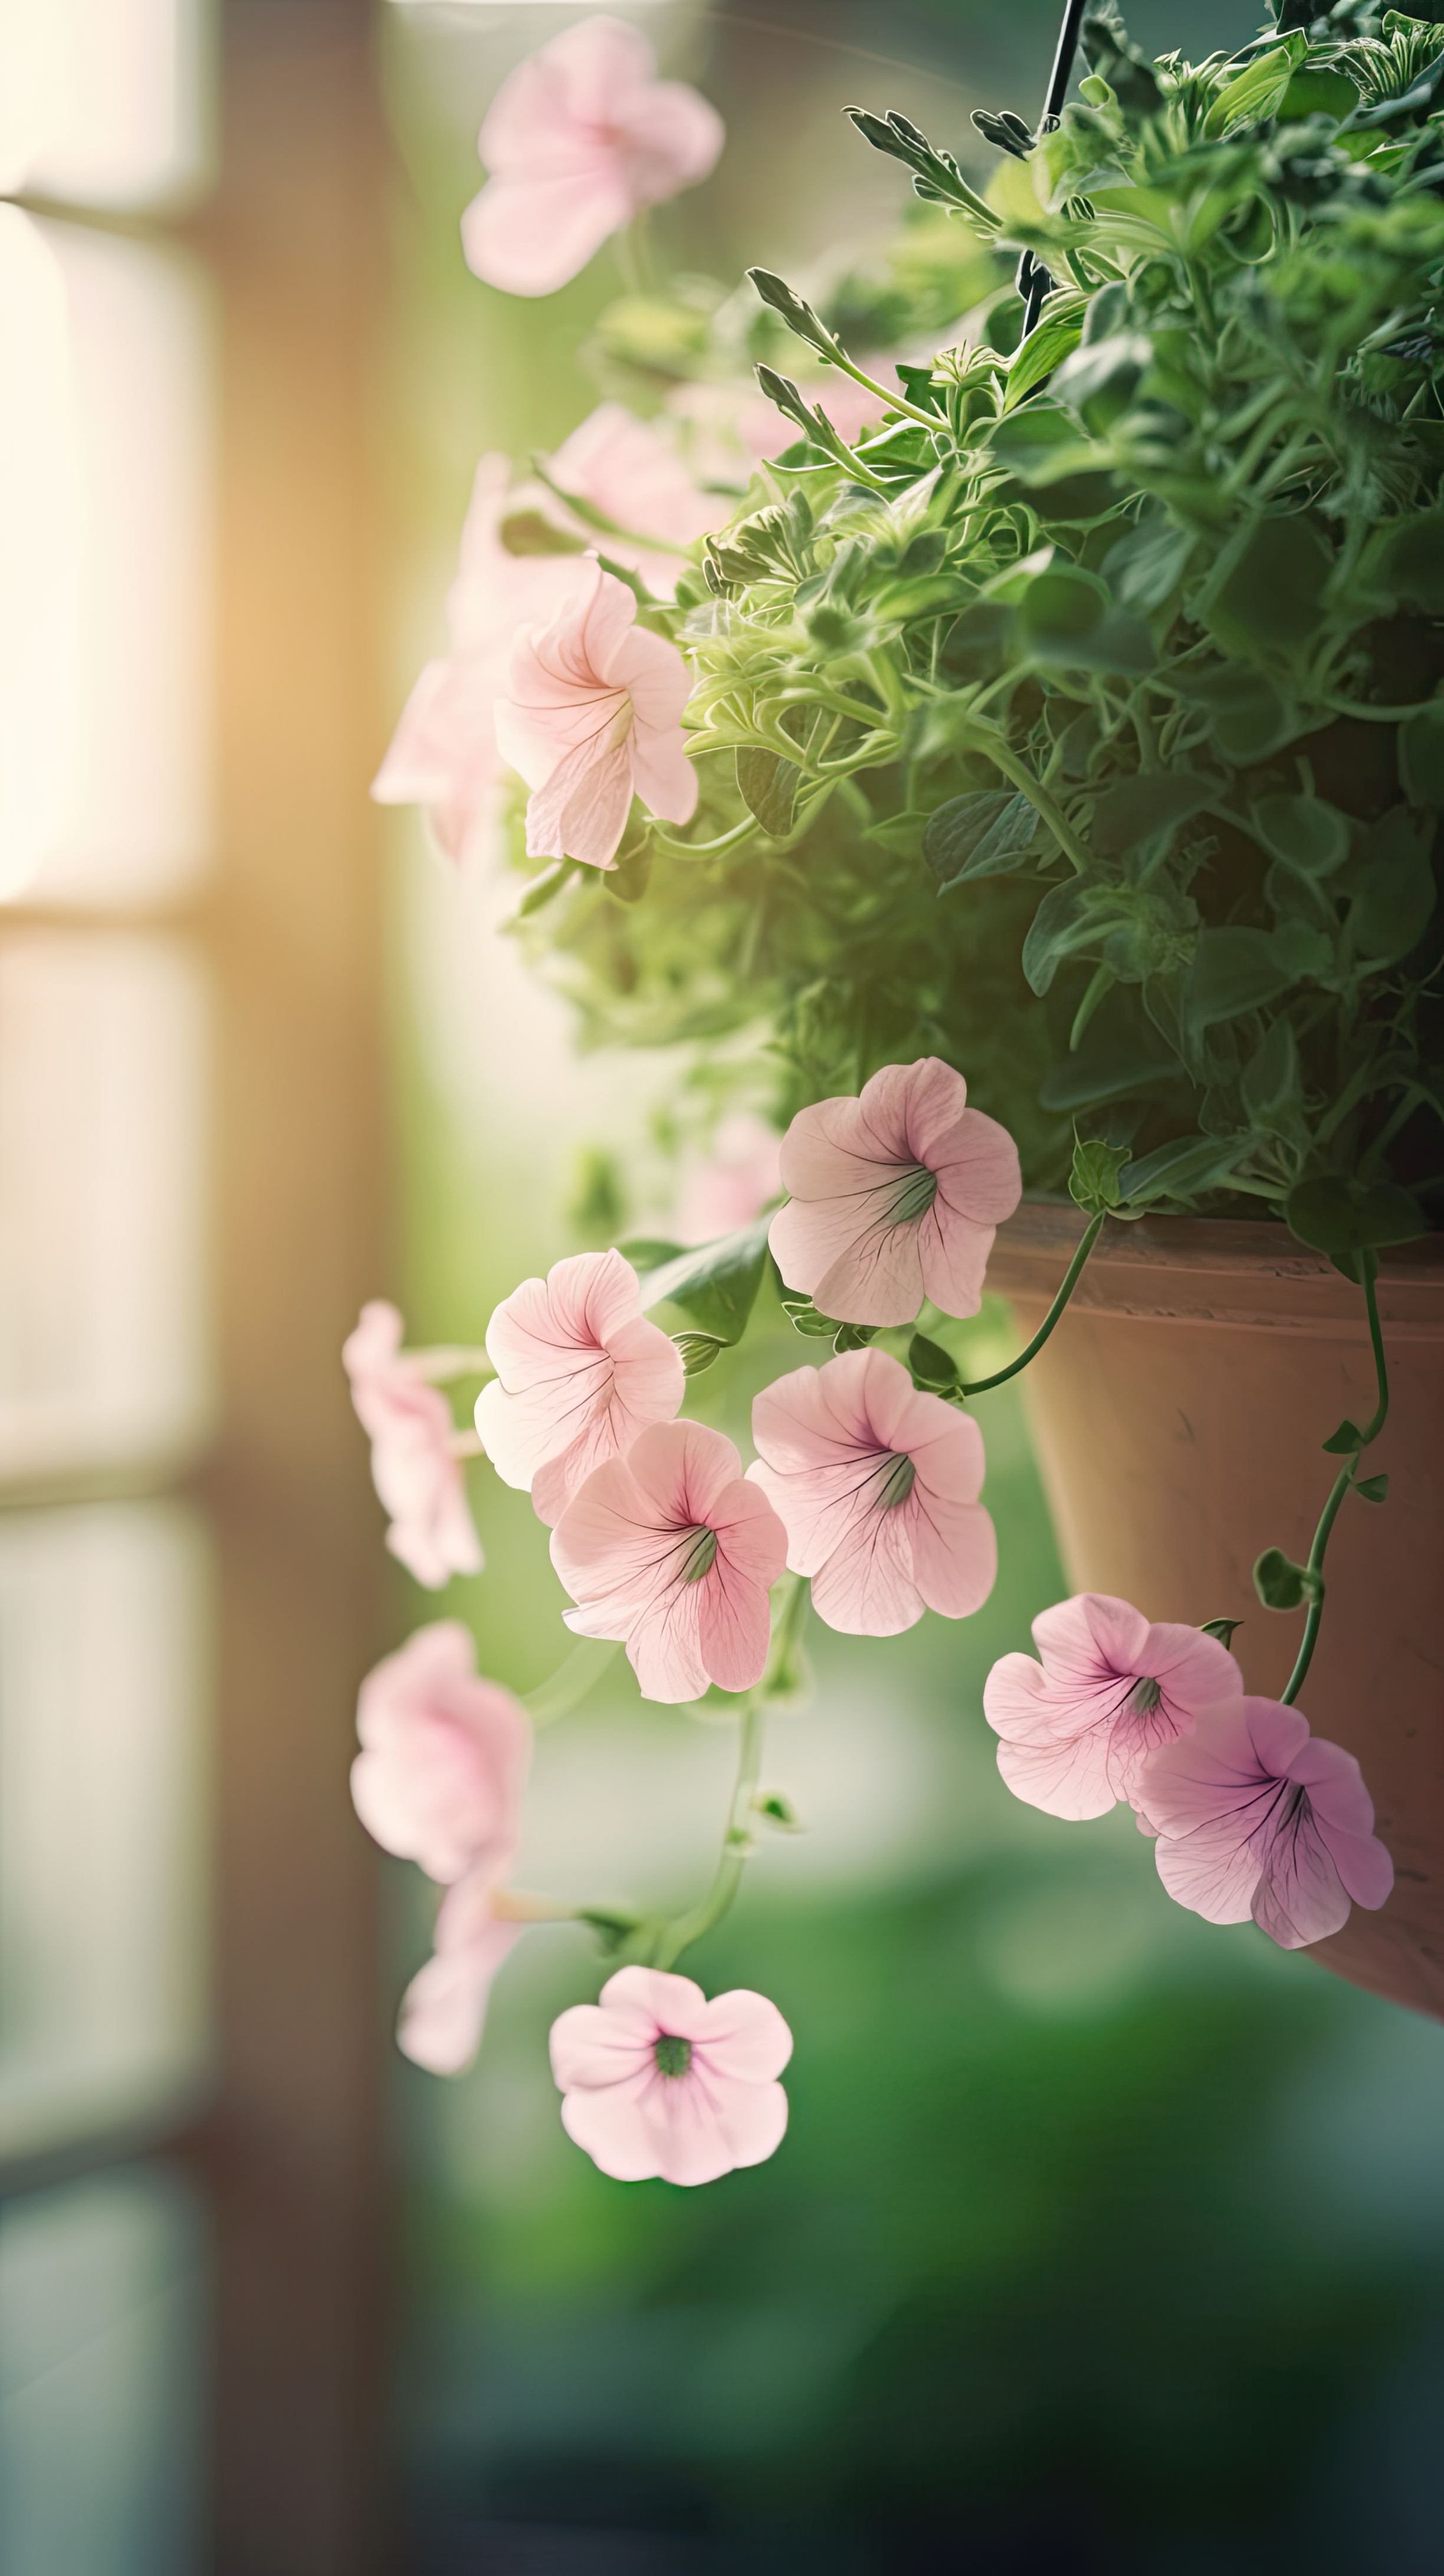 Soft pink petunia flower hanging from the eaves